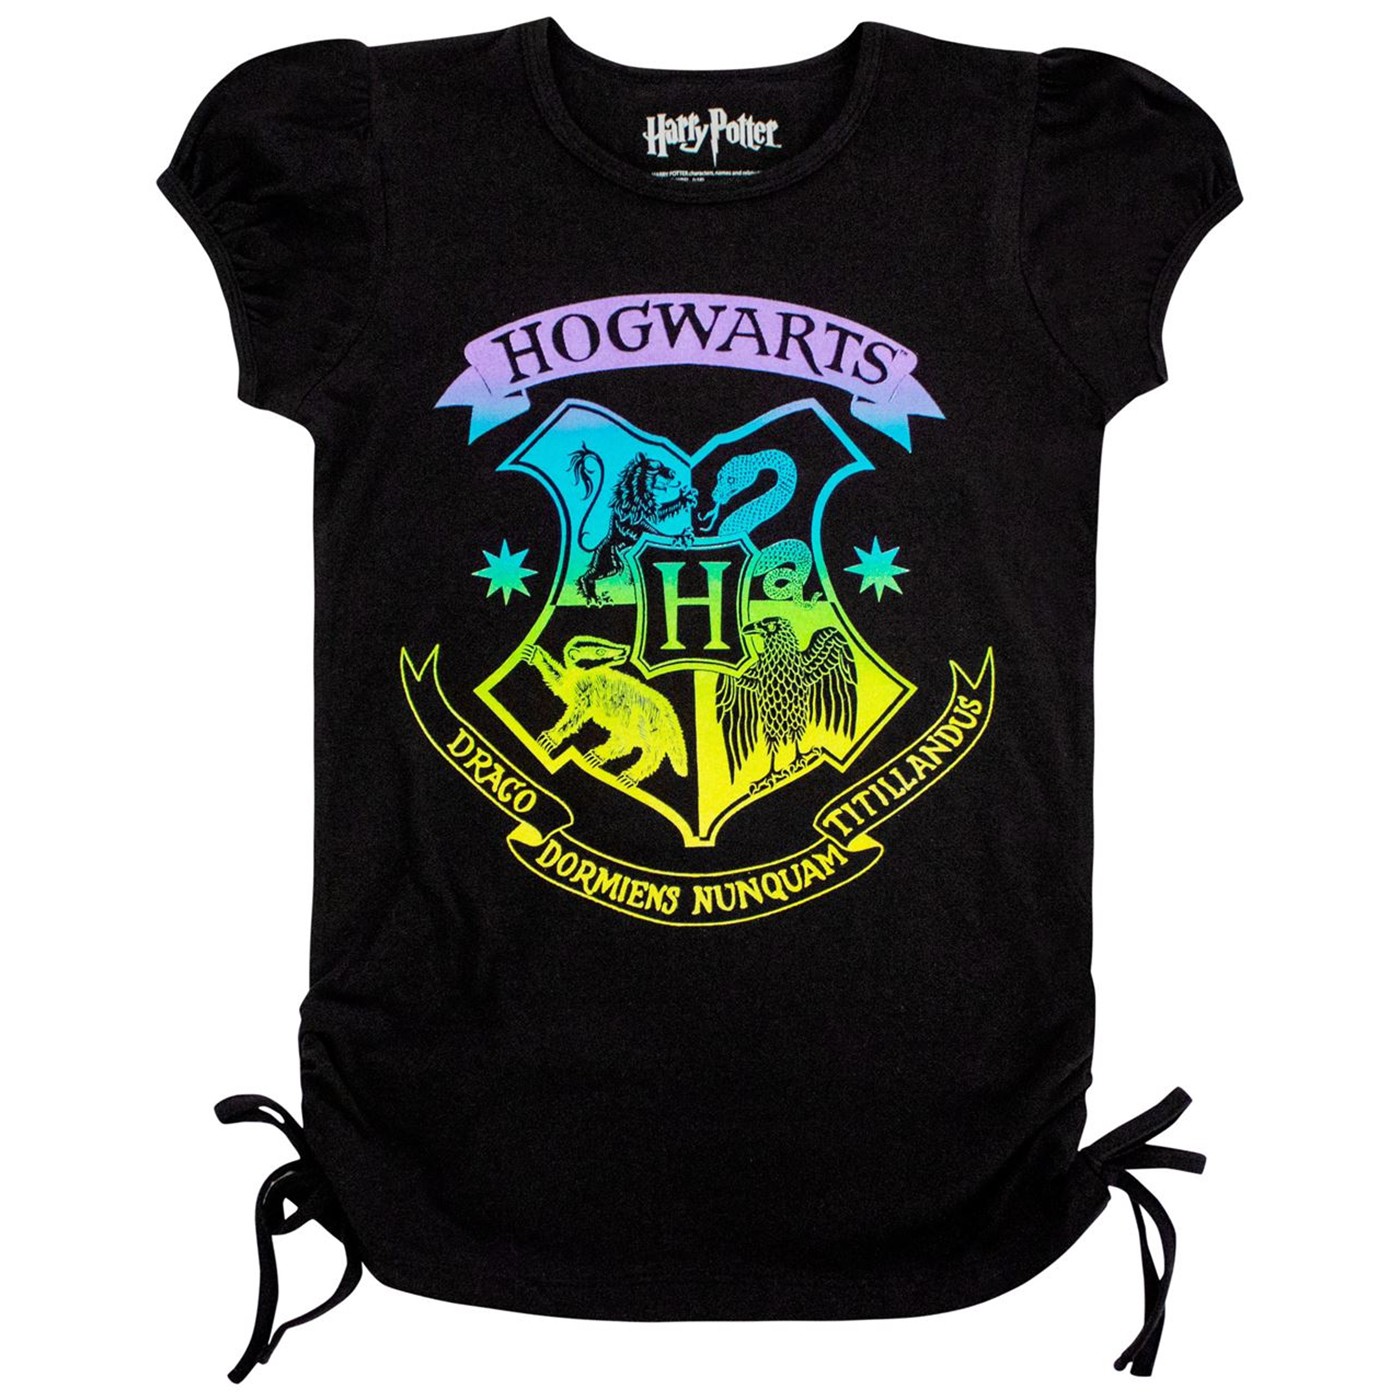 11 Best Harry Potter T Shirts To Buy In 2020 Guides To Buy